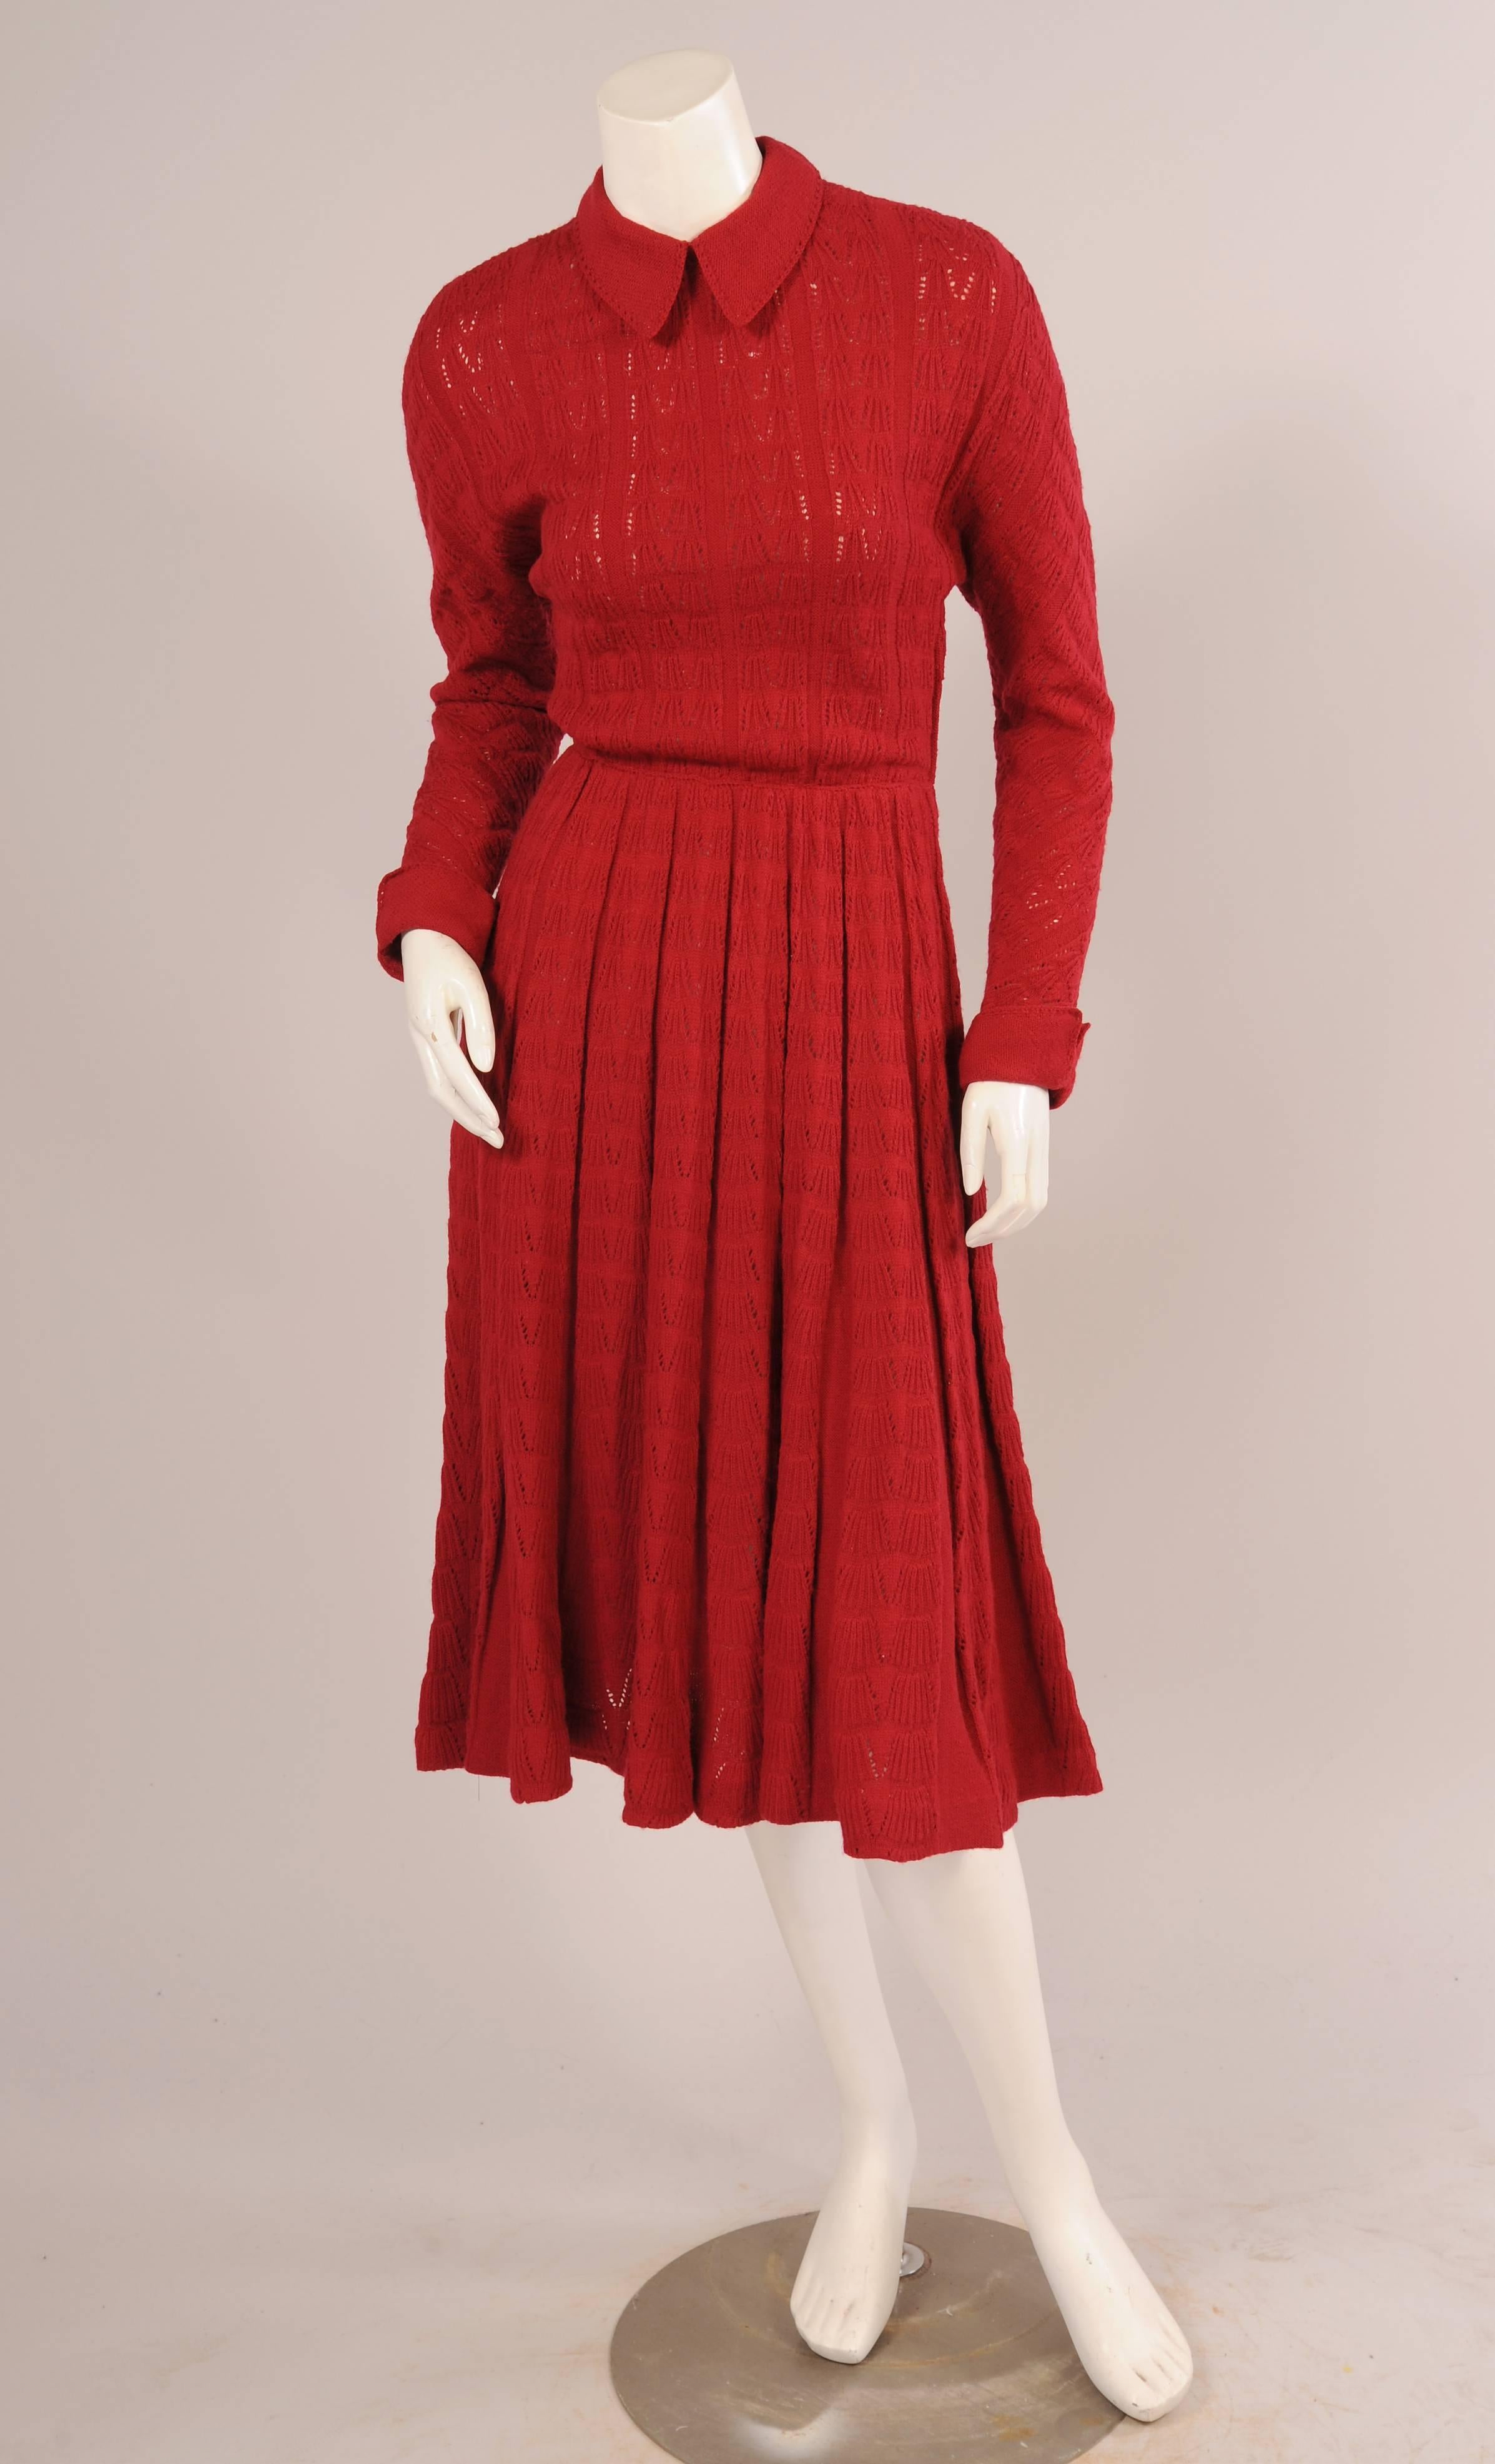 This dress has a sweet knit collar and cuffs and a great vertical knit design The long sleeves appear to be knit on the diagonal and the full skirt is narrow over the hips. There is a short zipper at the center back as well as a left side zipper.